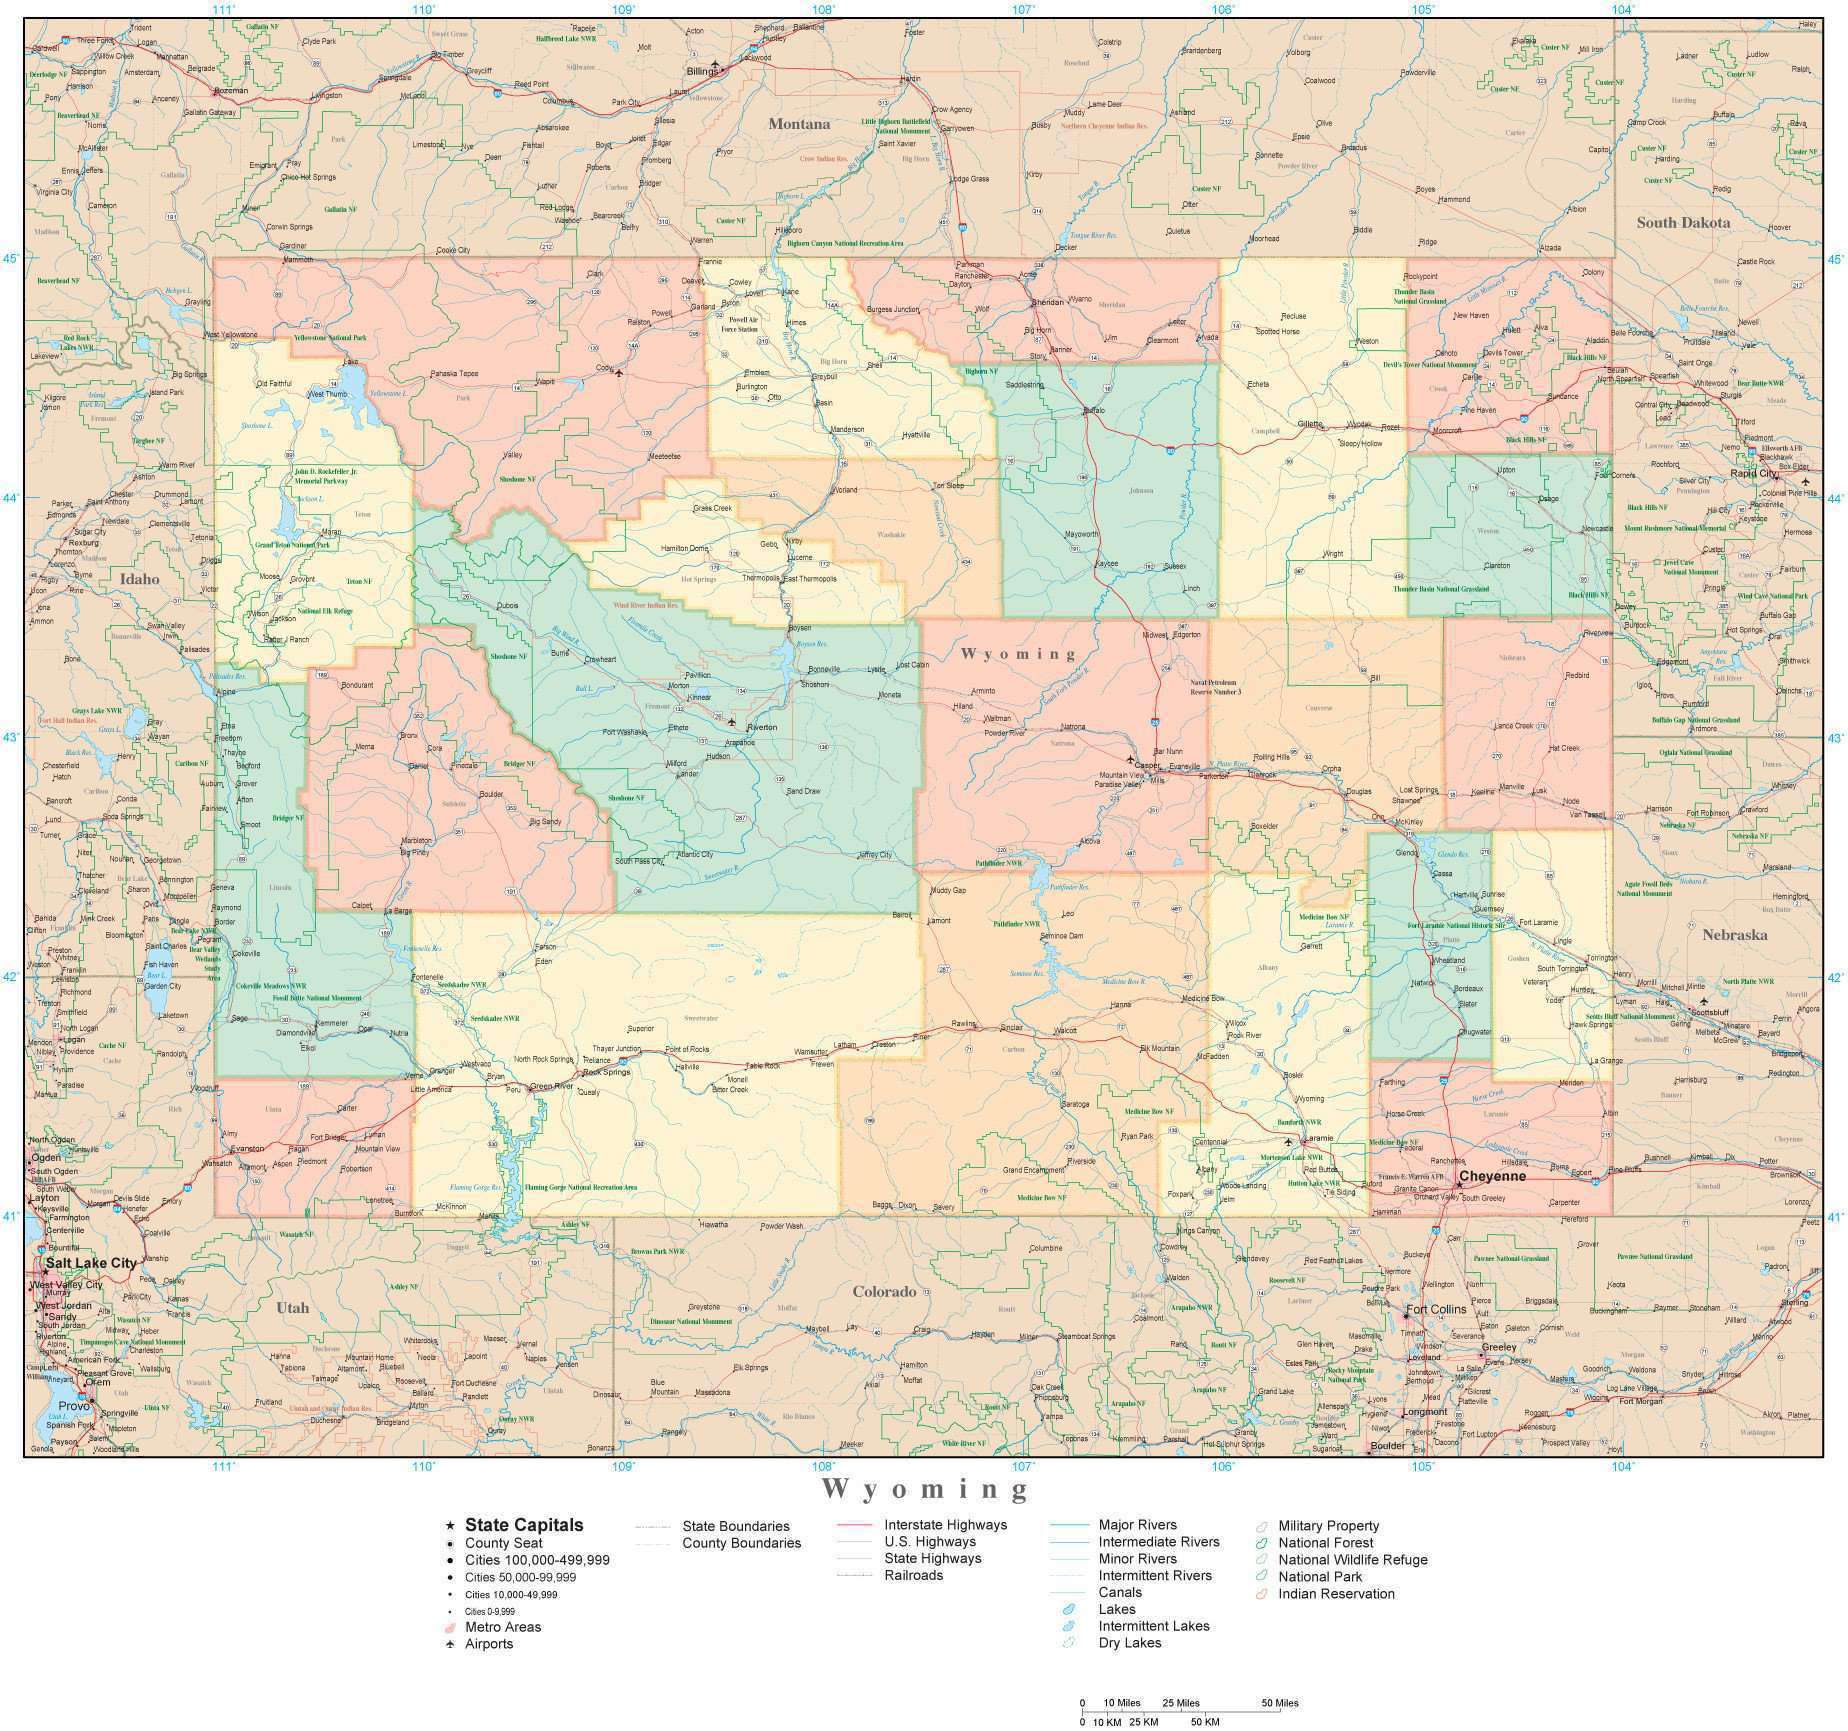 Wyoming State Map In Adobe Illustrator Vector Format Detailed Editable Map From Map Resources 6400